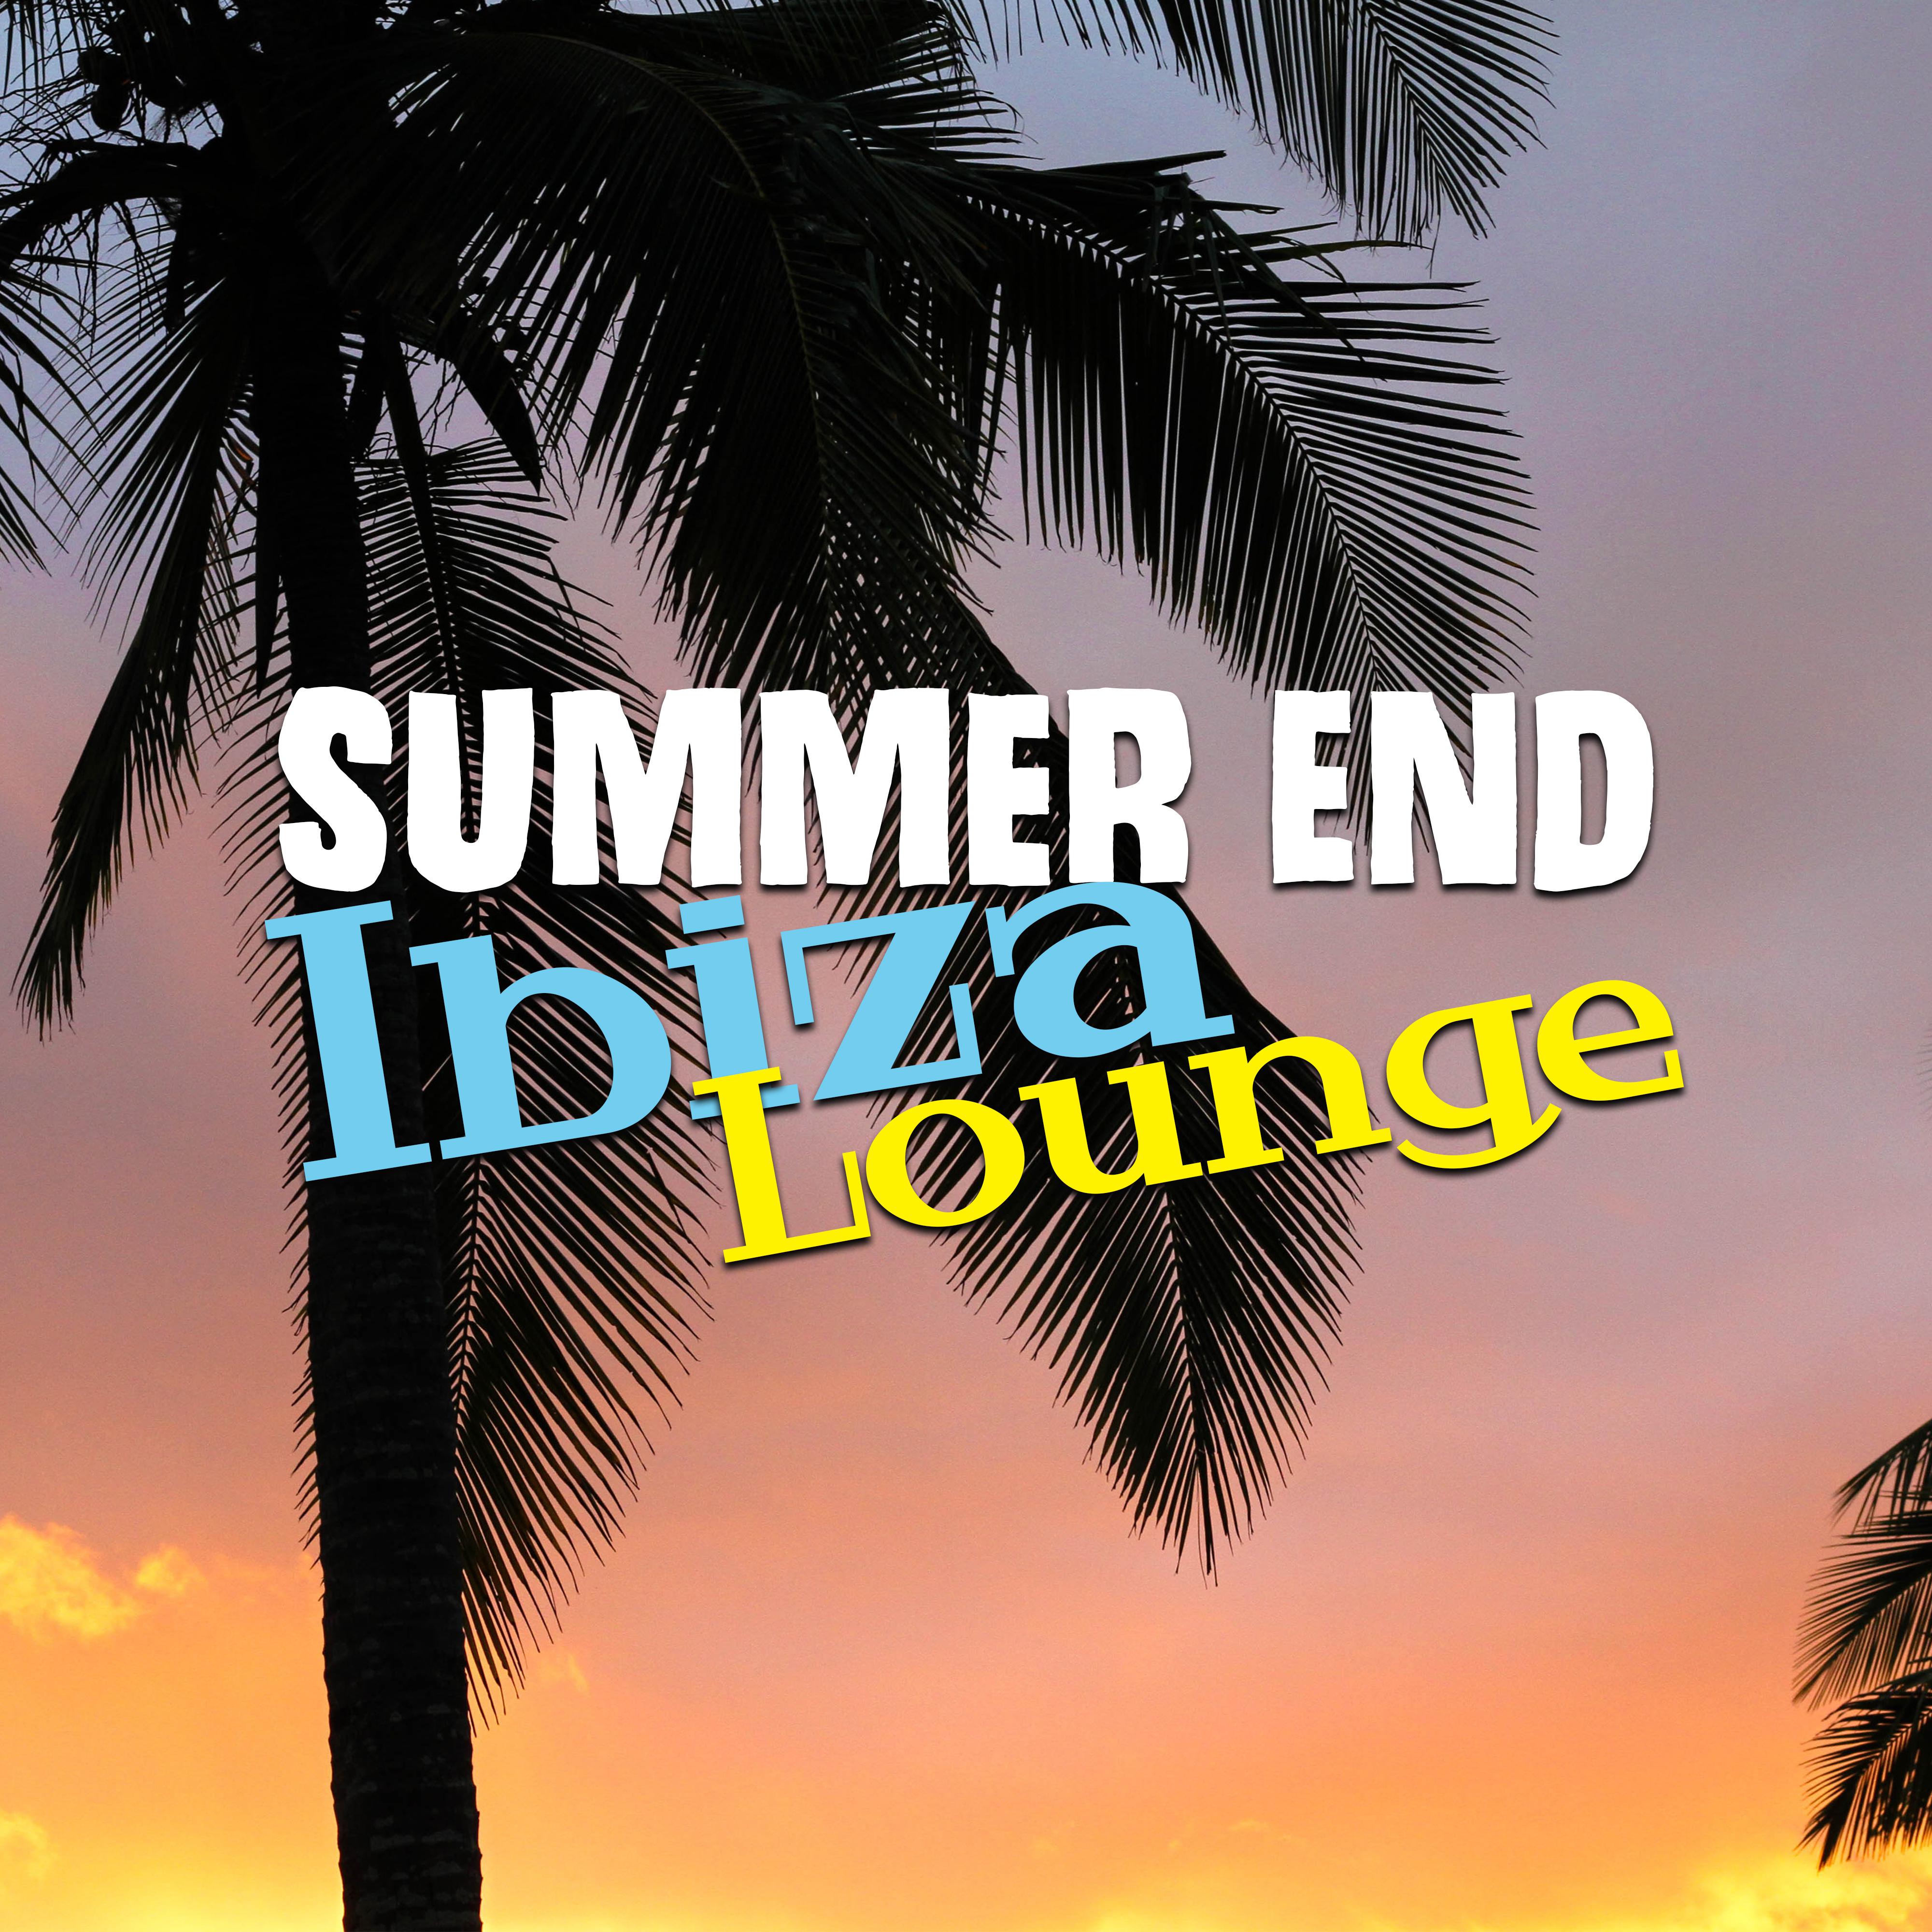 Summer End Ibiza Lounge – Chill Out Music, Relax & Chill, Ibiza Lounge, Party Hits